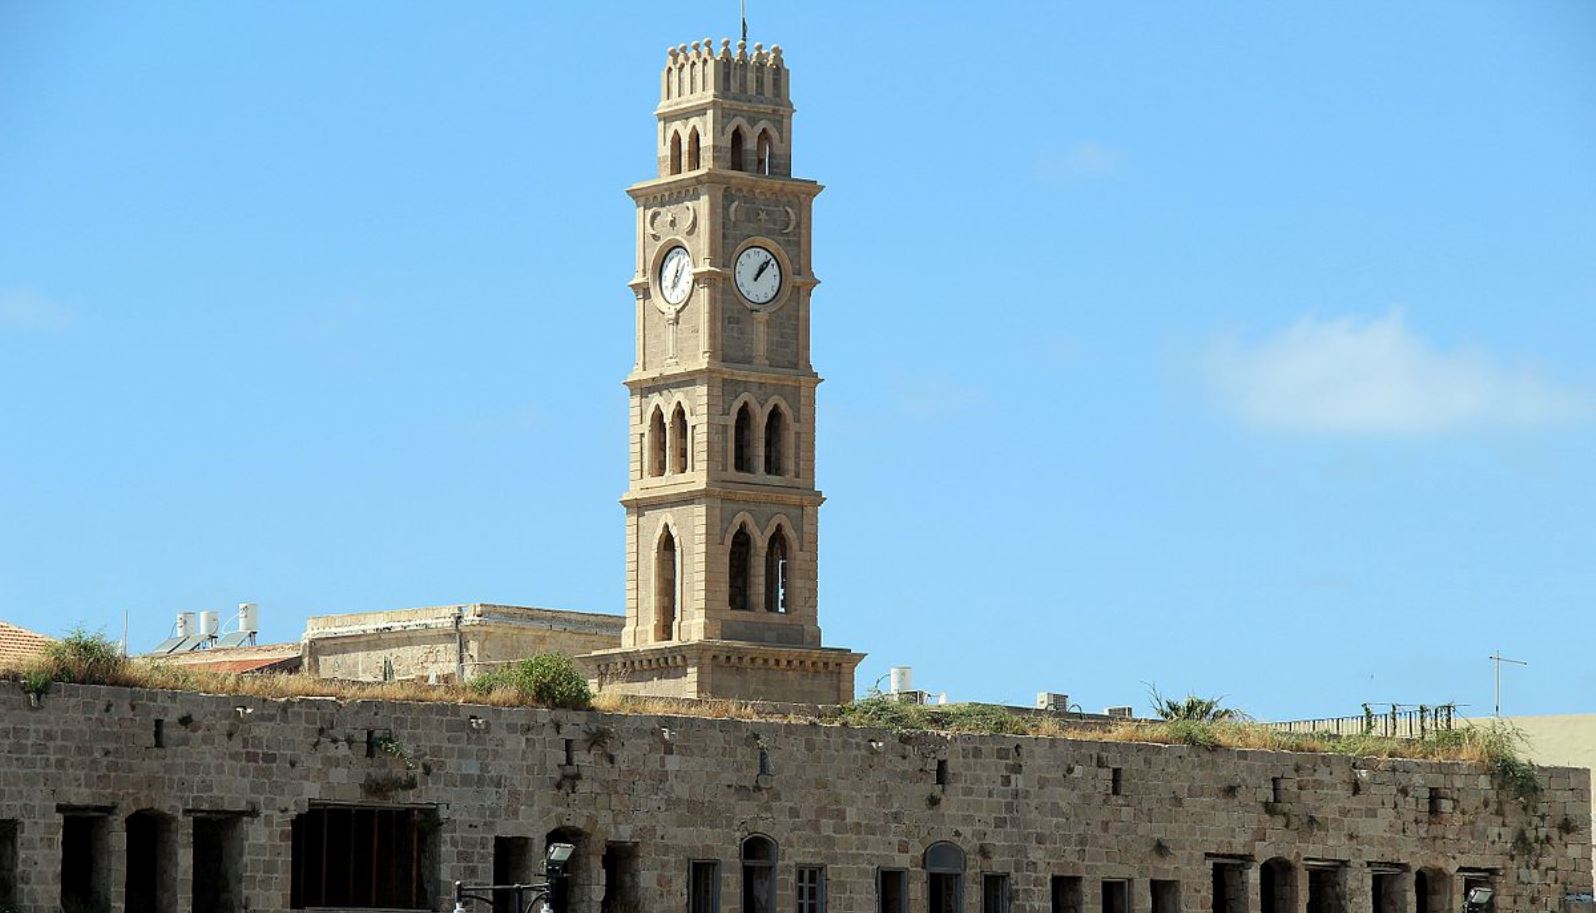 Acre clock tower photo by Larisa Sklar Giller/Wikimedia Commons